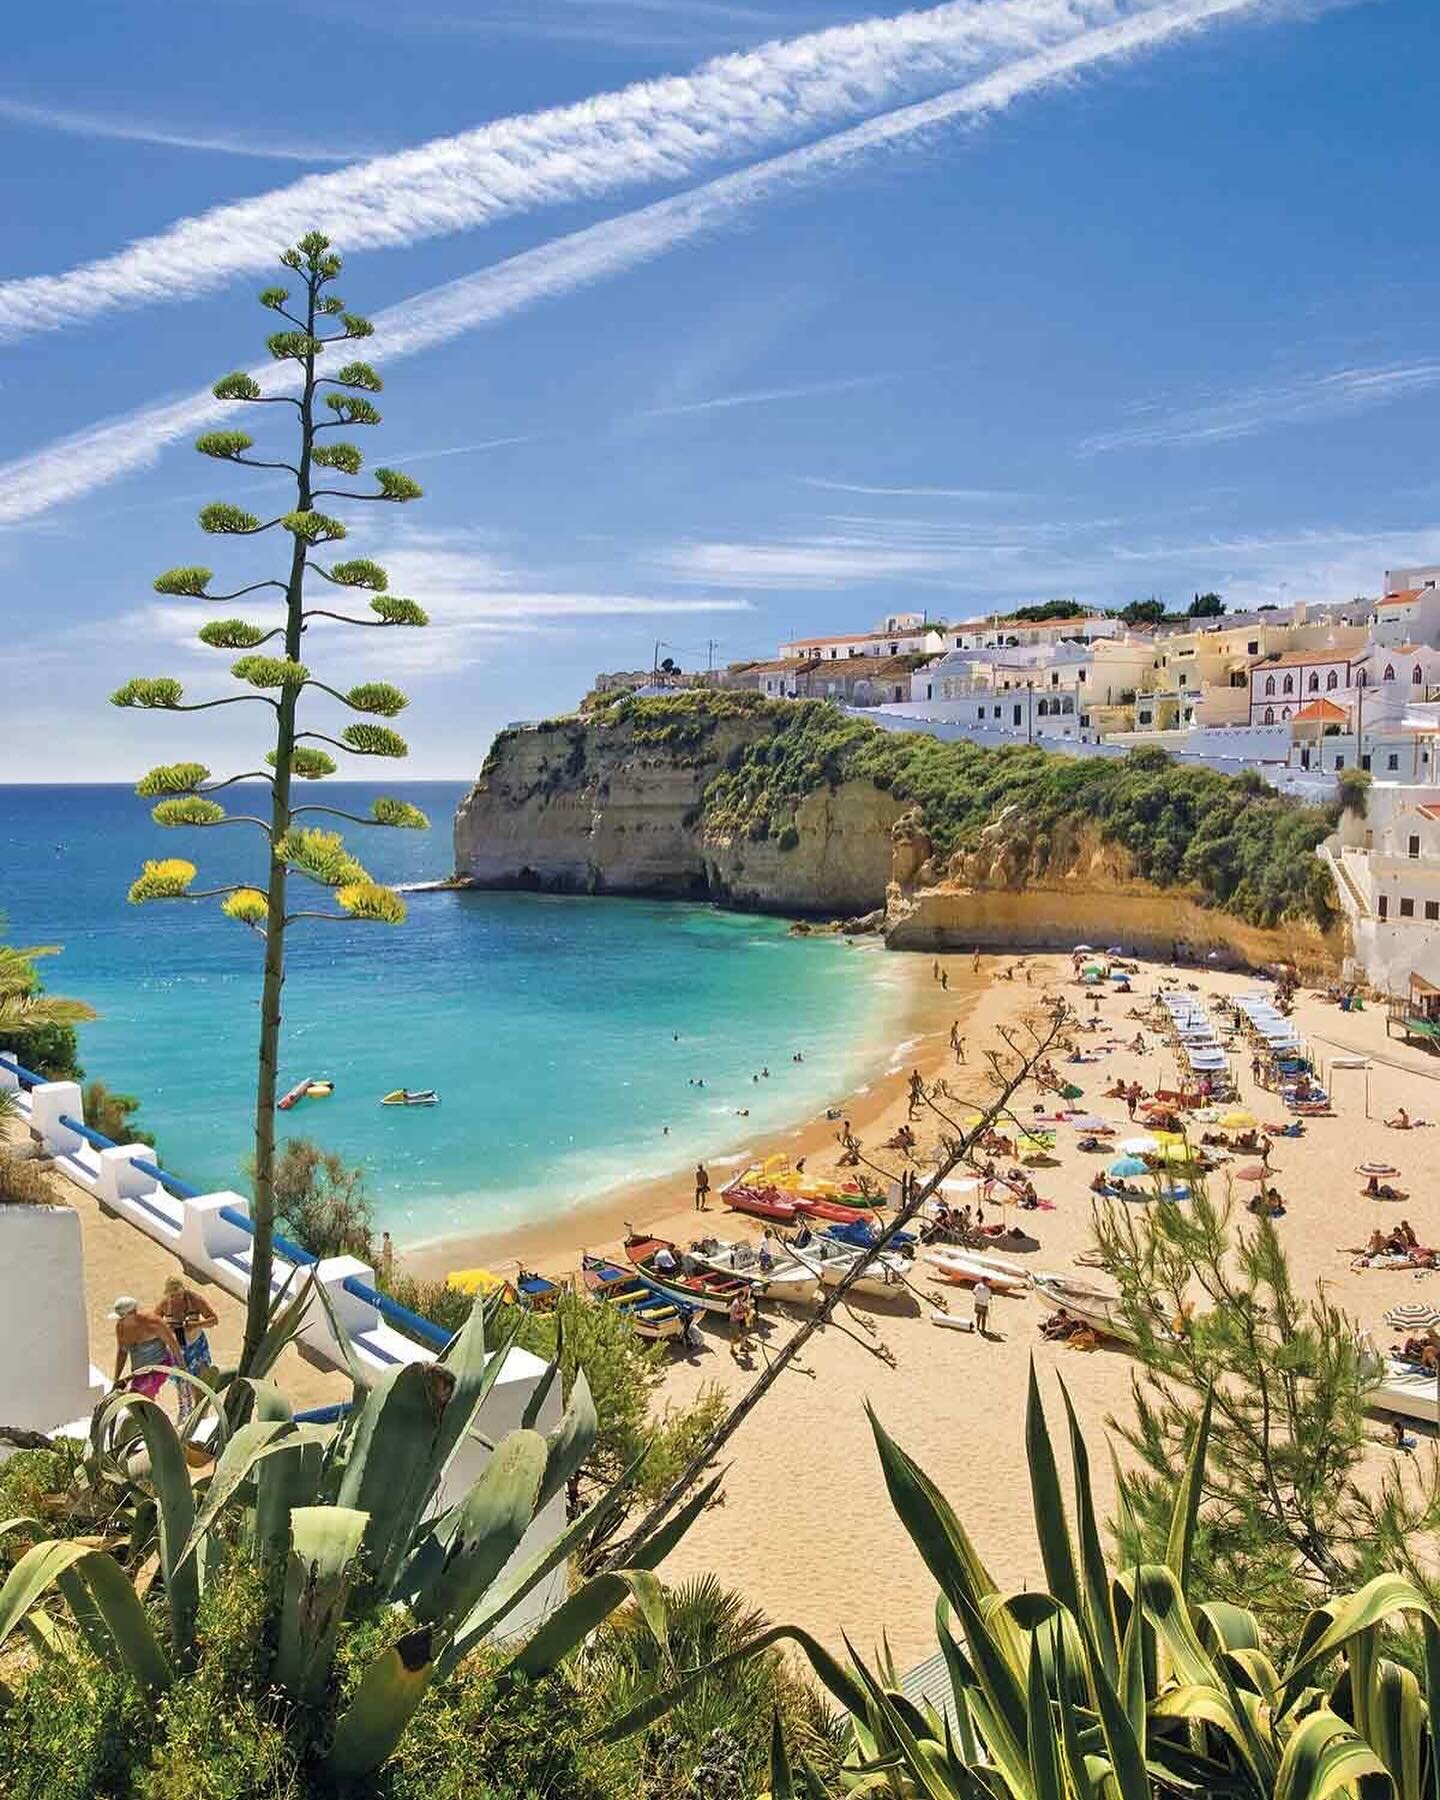 SOUTHERN PORTUGAL
June 23-29th, 2024
with @isabella_channing &amp; @heatherlilleston 

⛱️ 6 nights at our favorite @quintabonita_countryhouse 

⛱️ more beaches and cute fishing villages to explore than you will have time for

⛱️ delicious meals made 